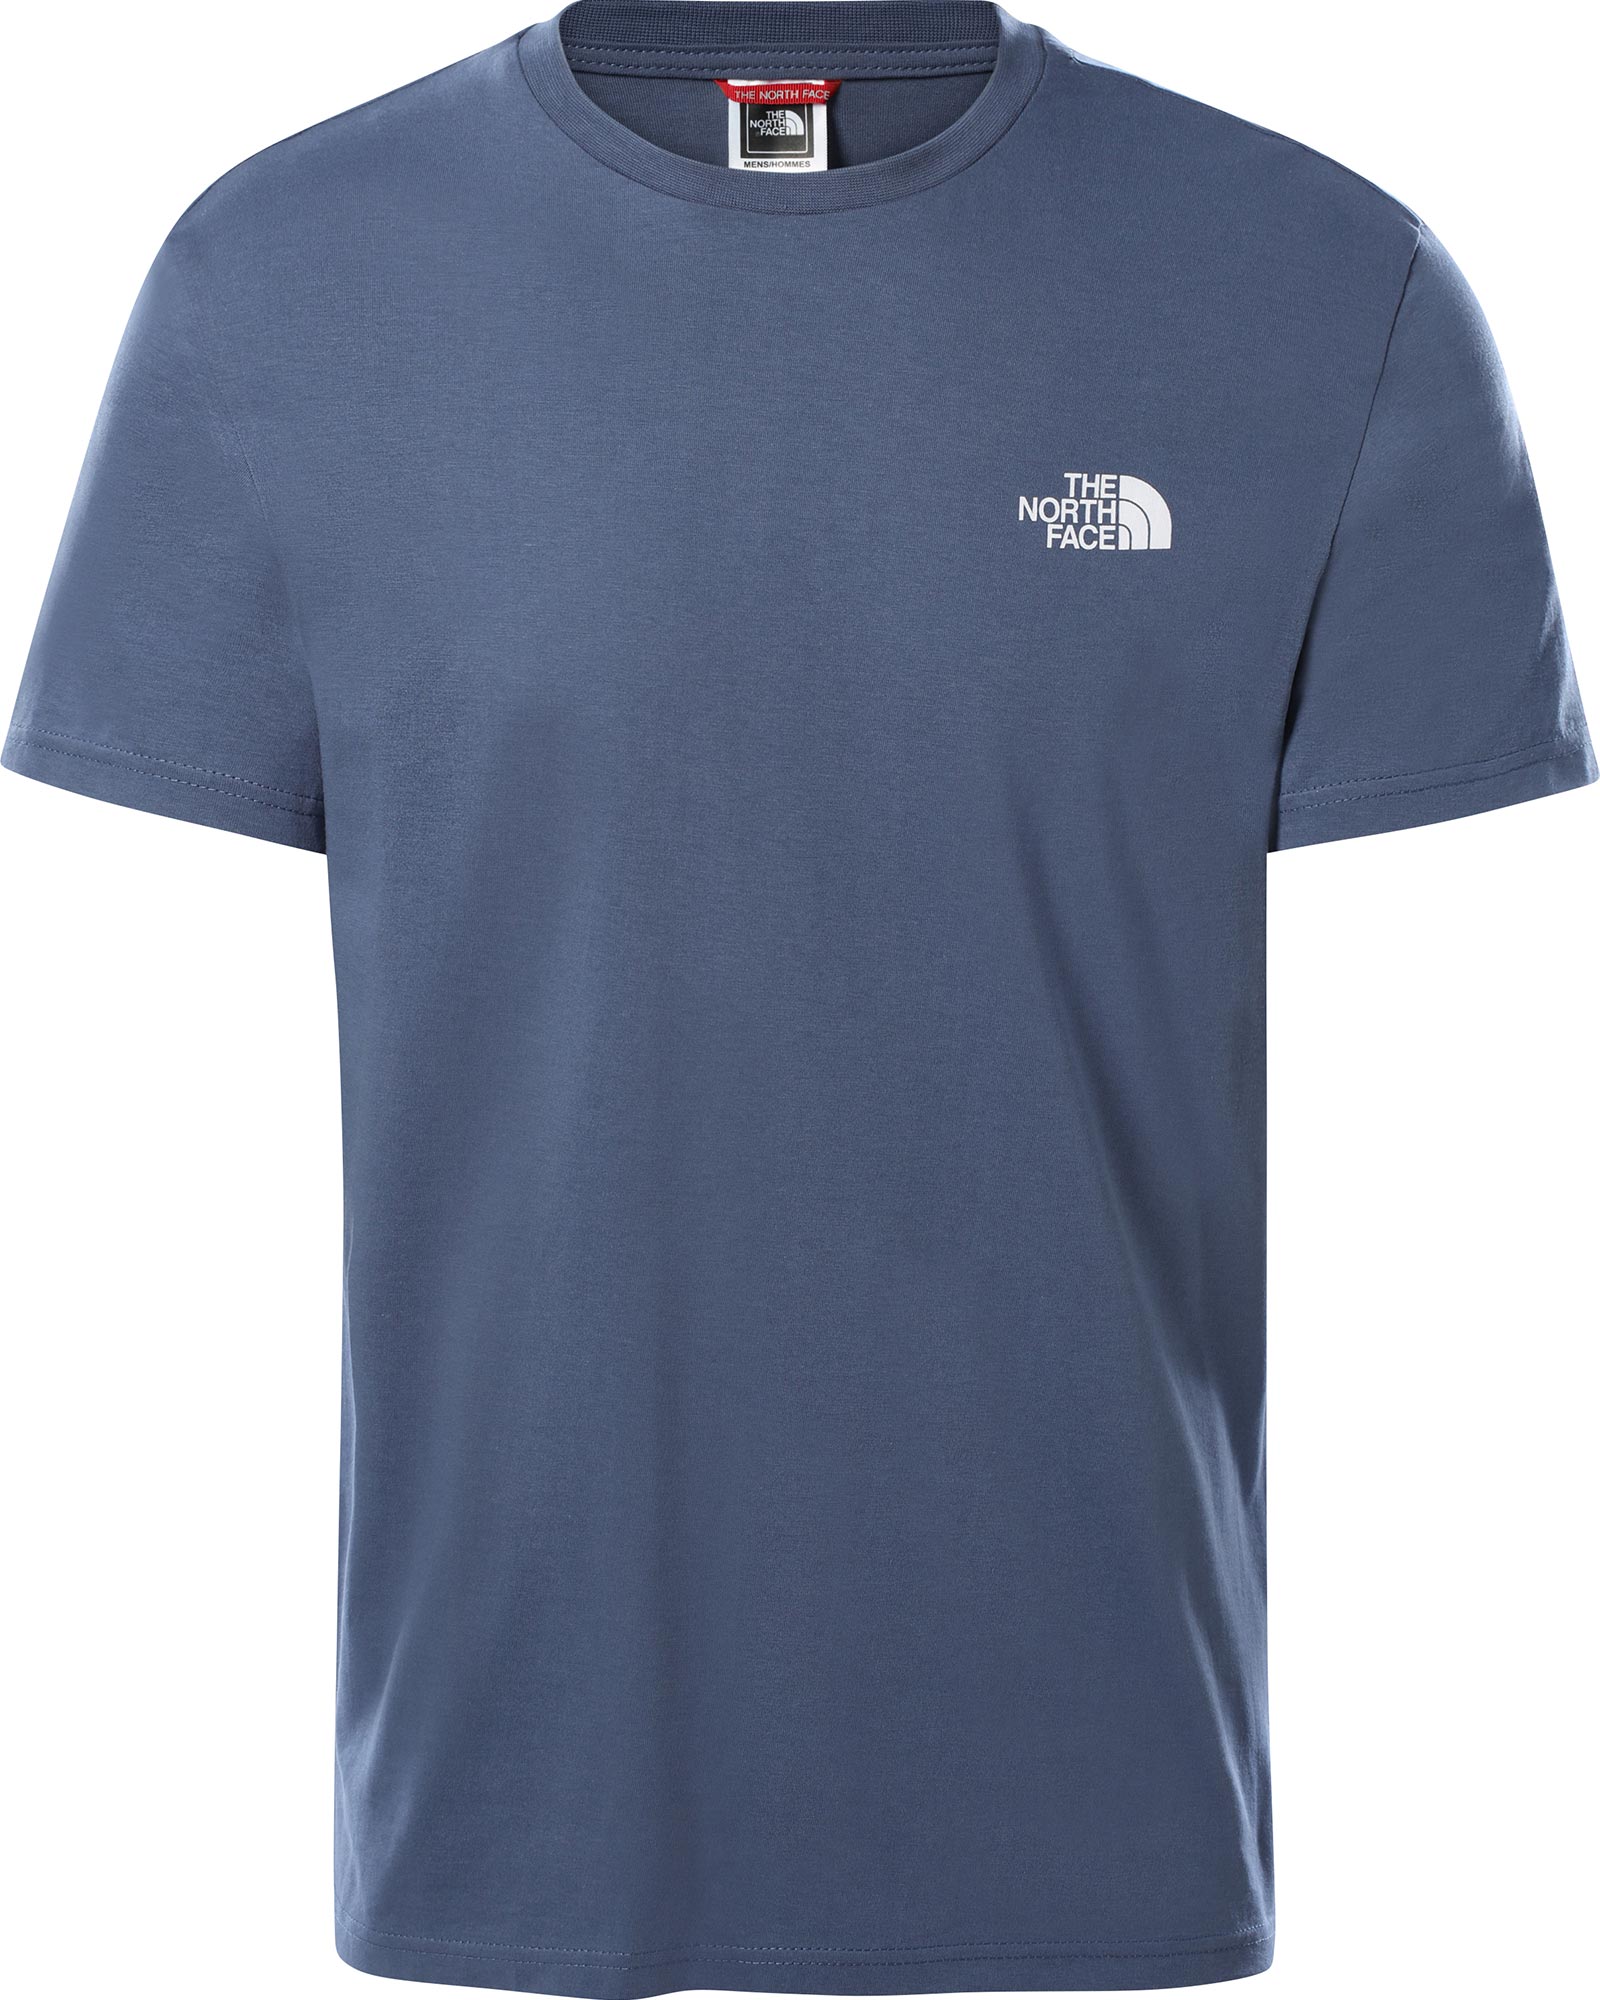 The North Face Simple Dome Men’s T Shirt - Blue Wing Teal S